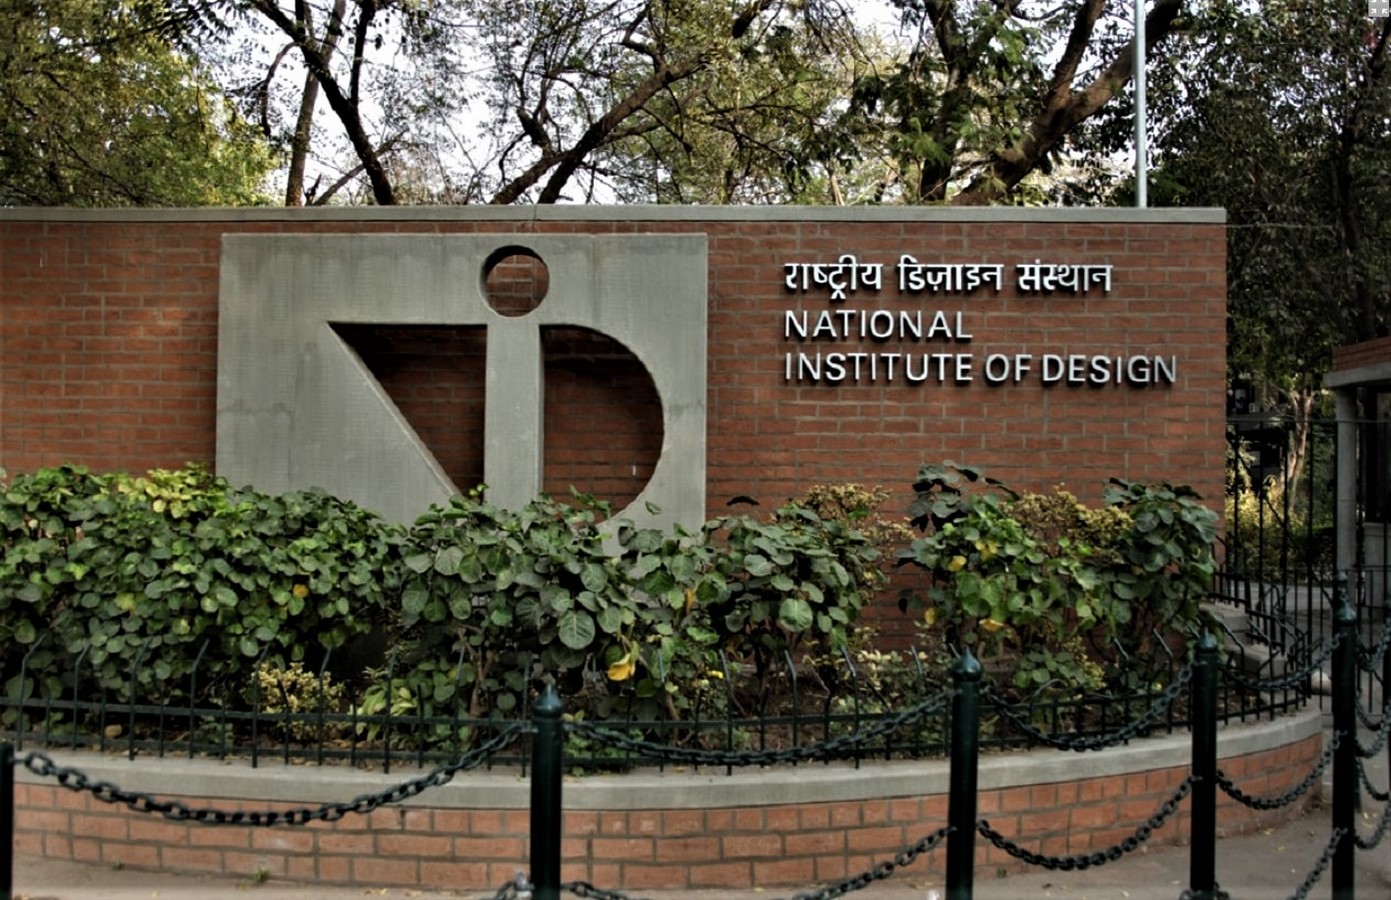 A3918 15 Top Universities For Masters In Interior Design NID Ahmedabad Image 1 